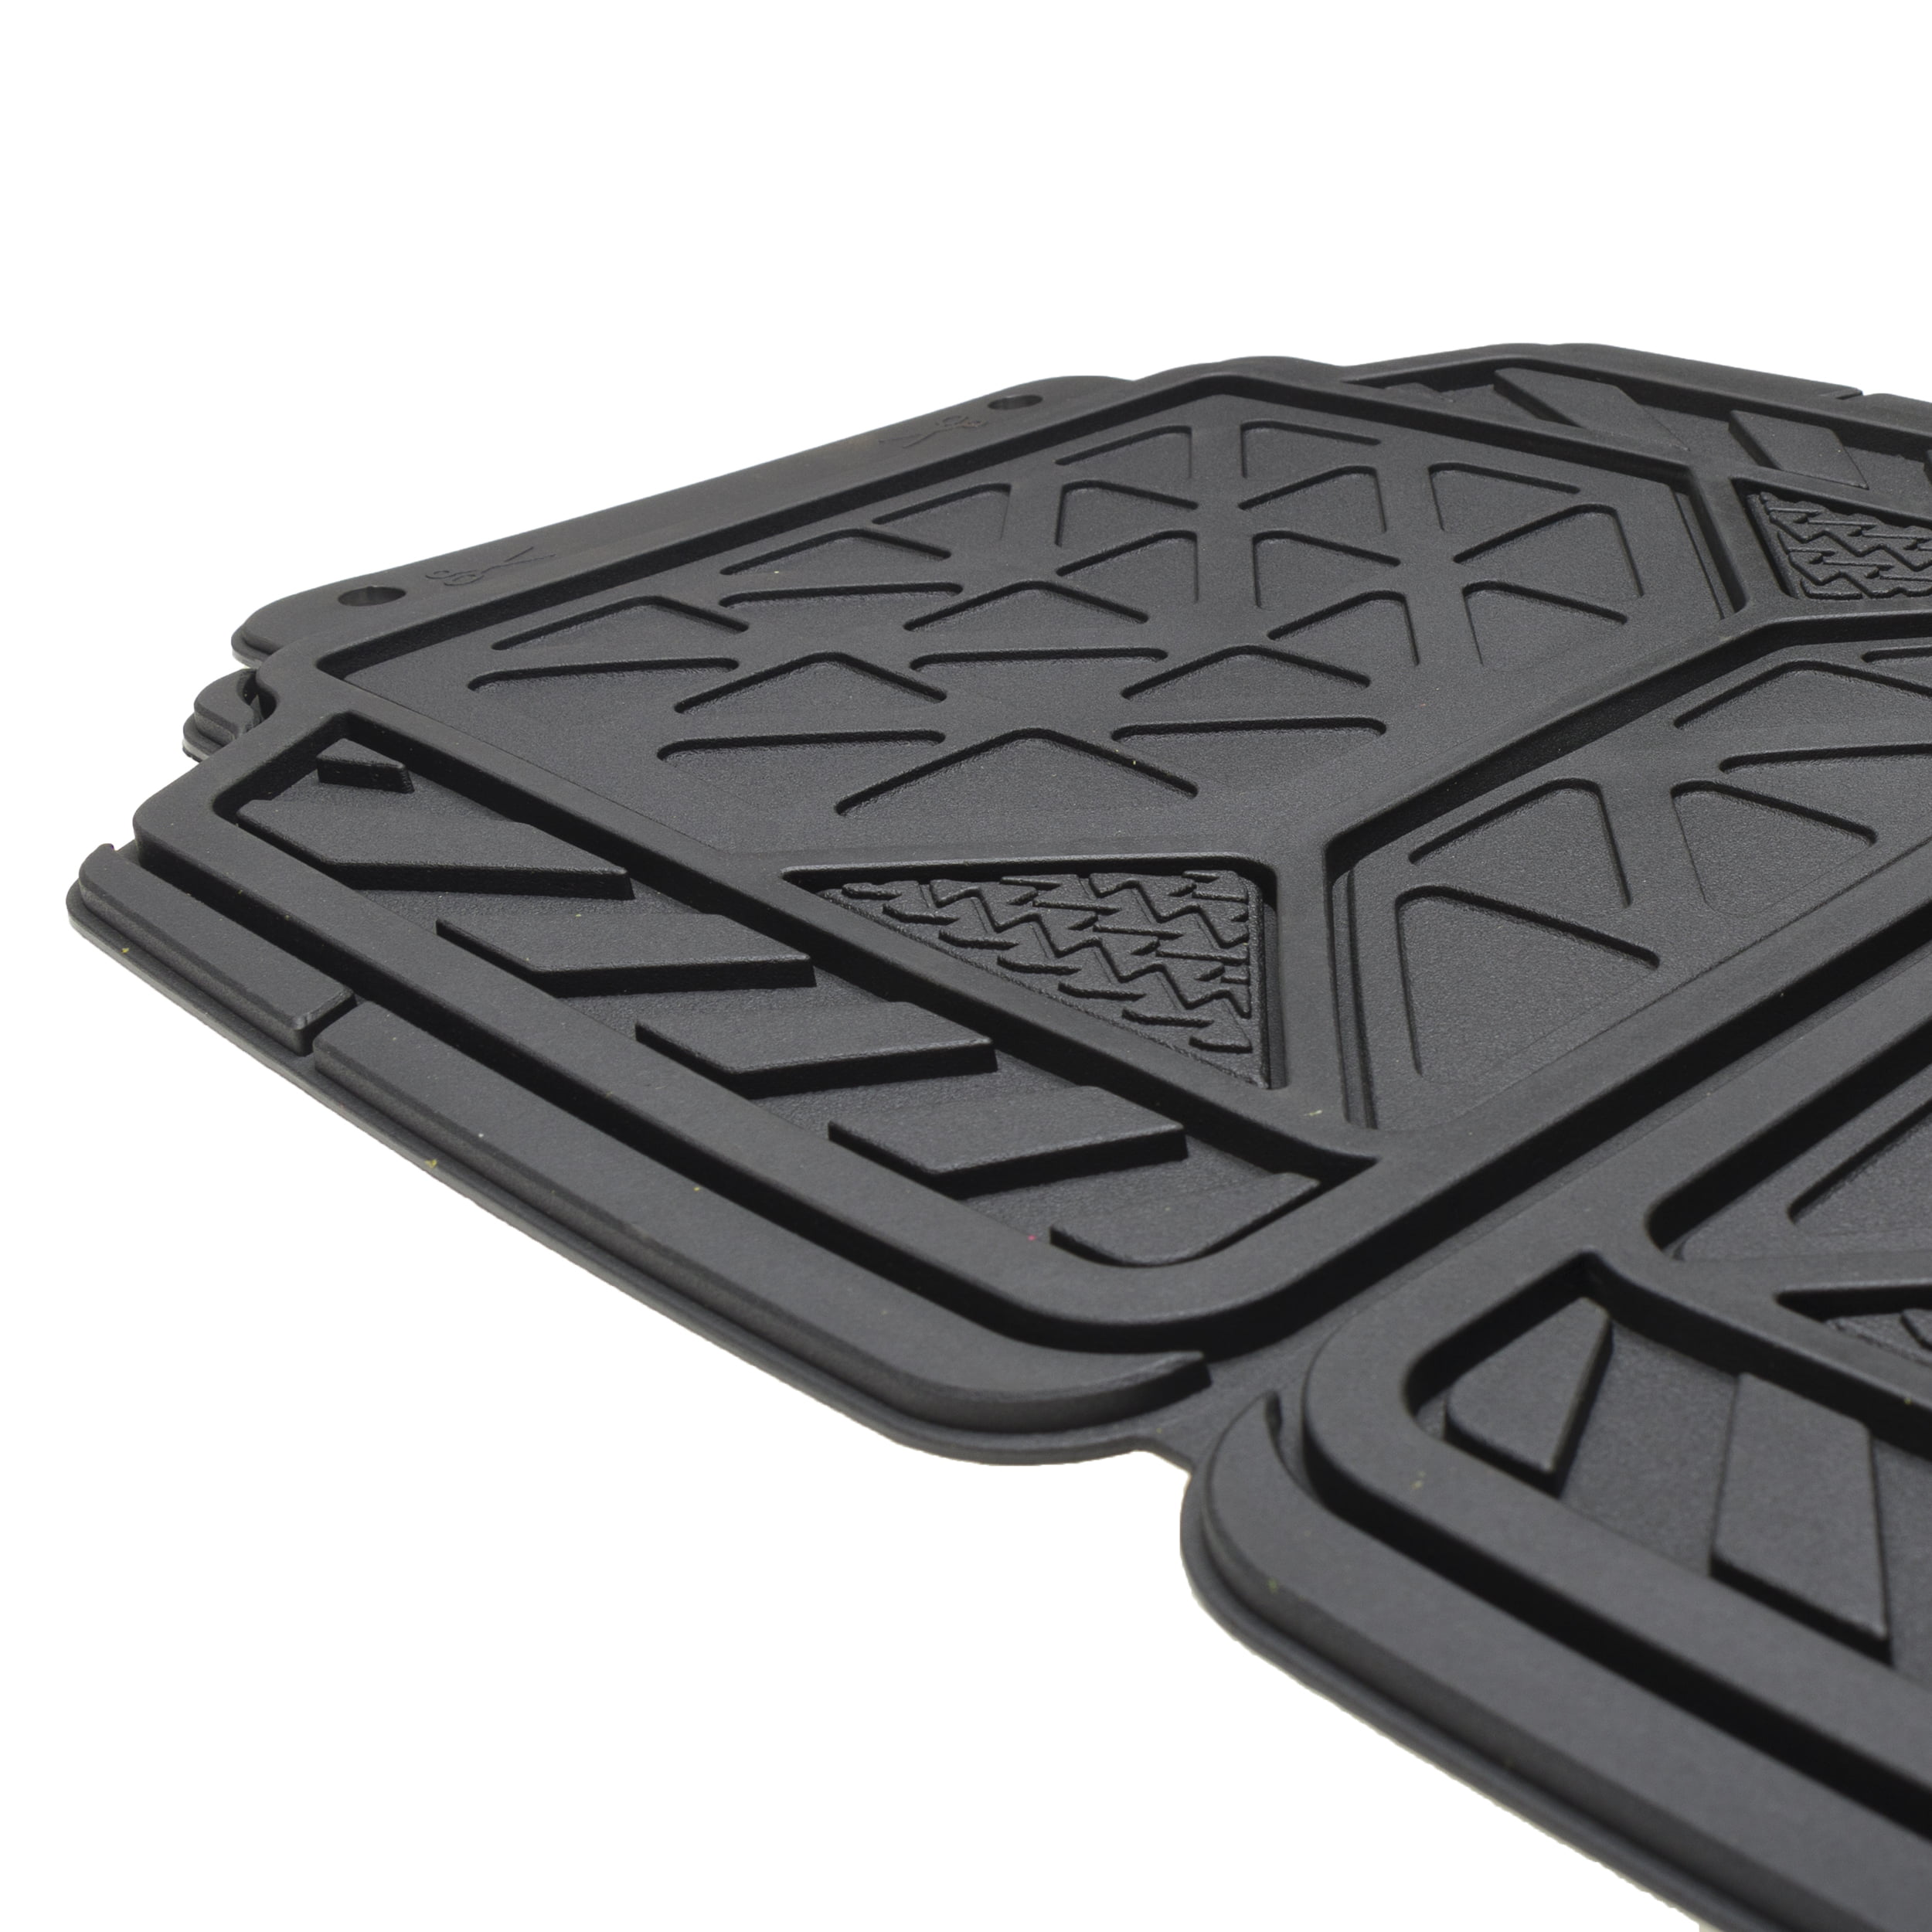 Armor All 4-Piece Rubber Trim-to-Fit Floor Mats Black, 79960DCWDI